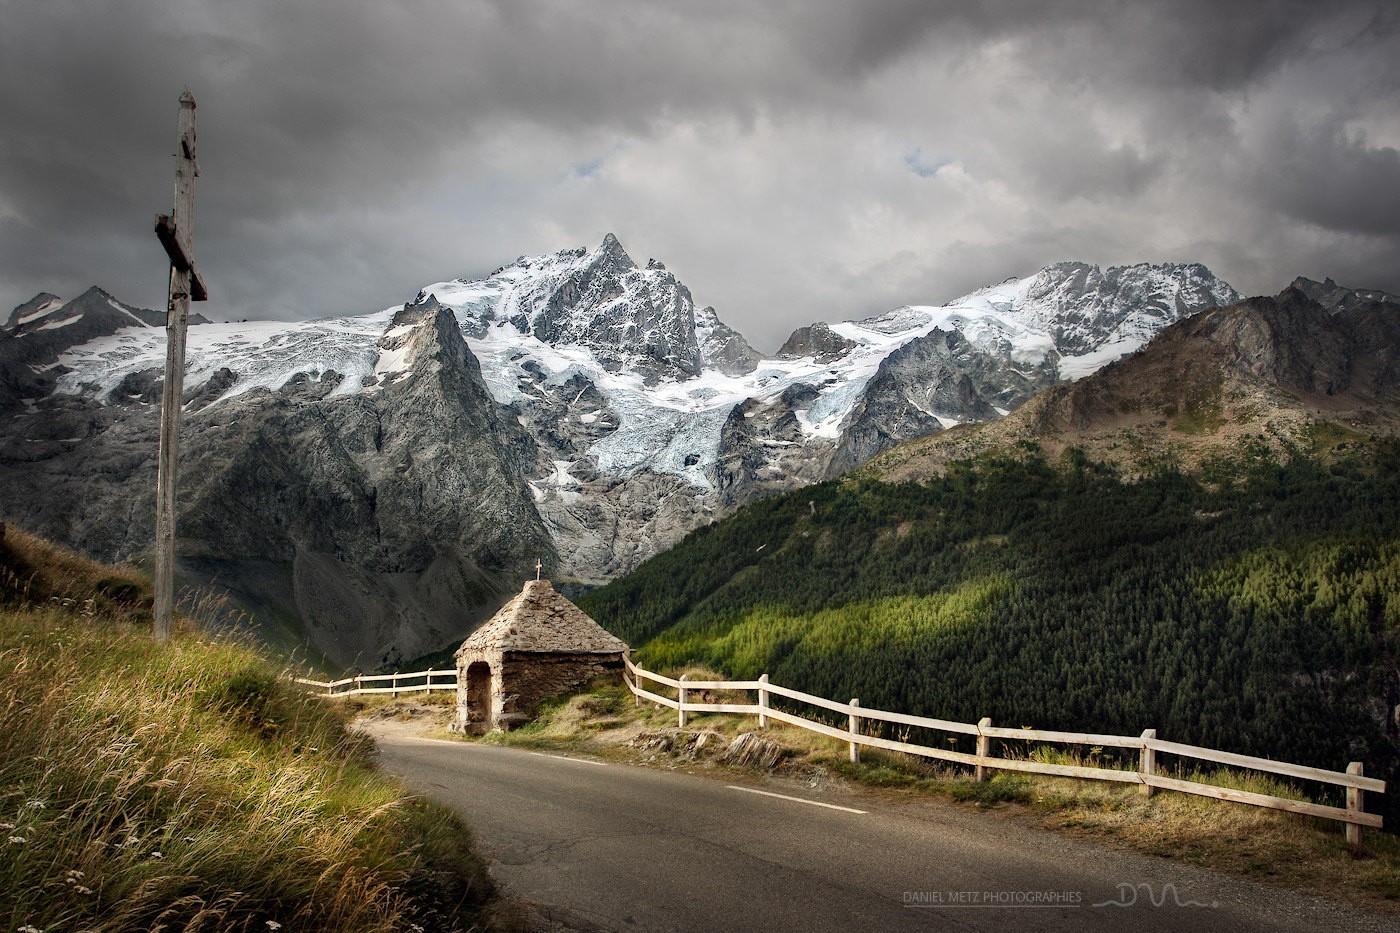 General 1400x933 landscape nature mountains Alps overcast road snowy peak outdoors